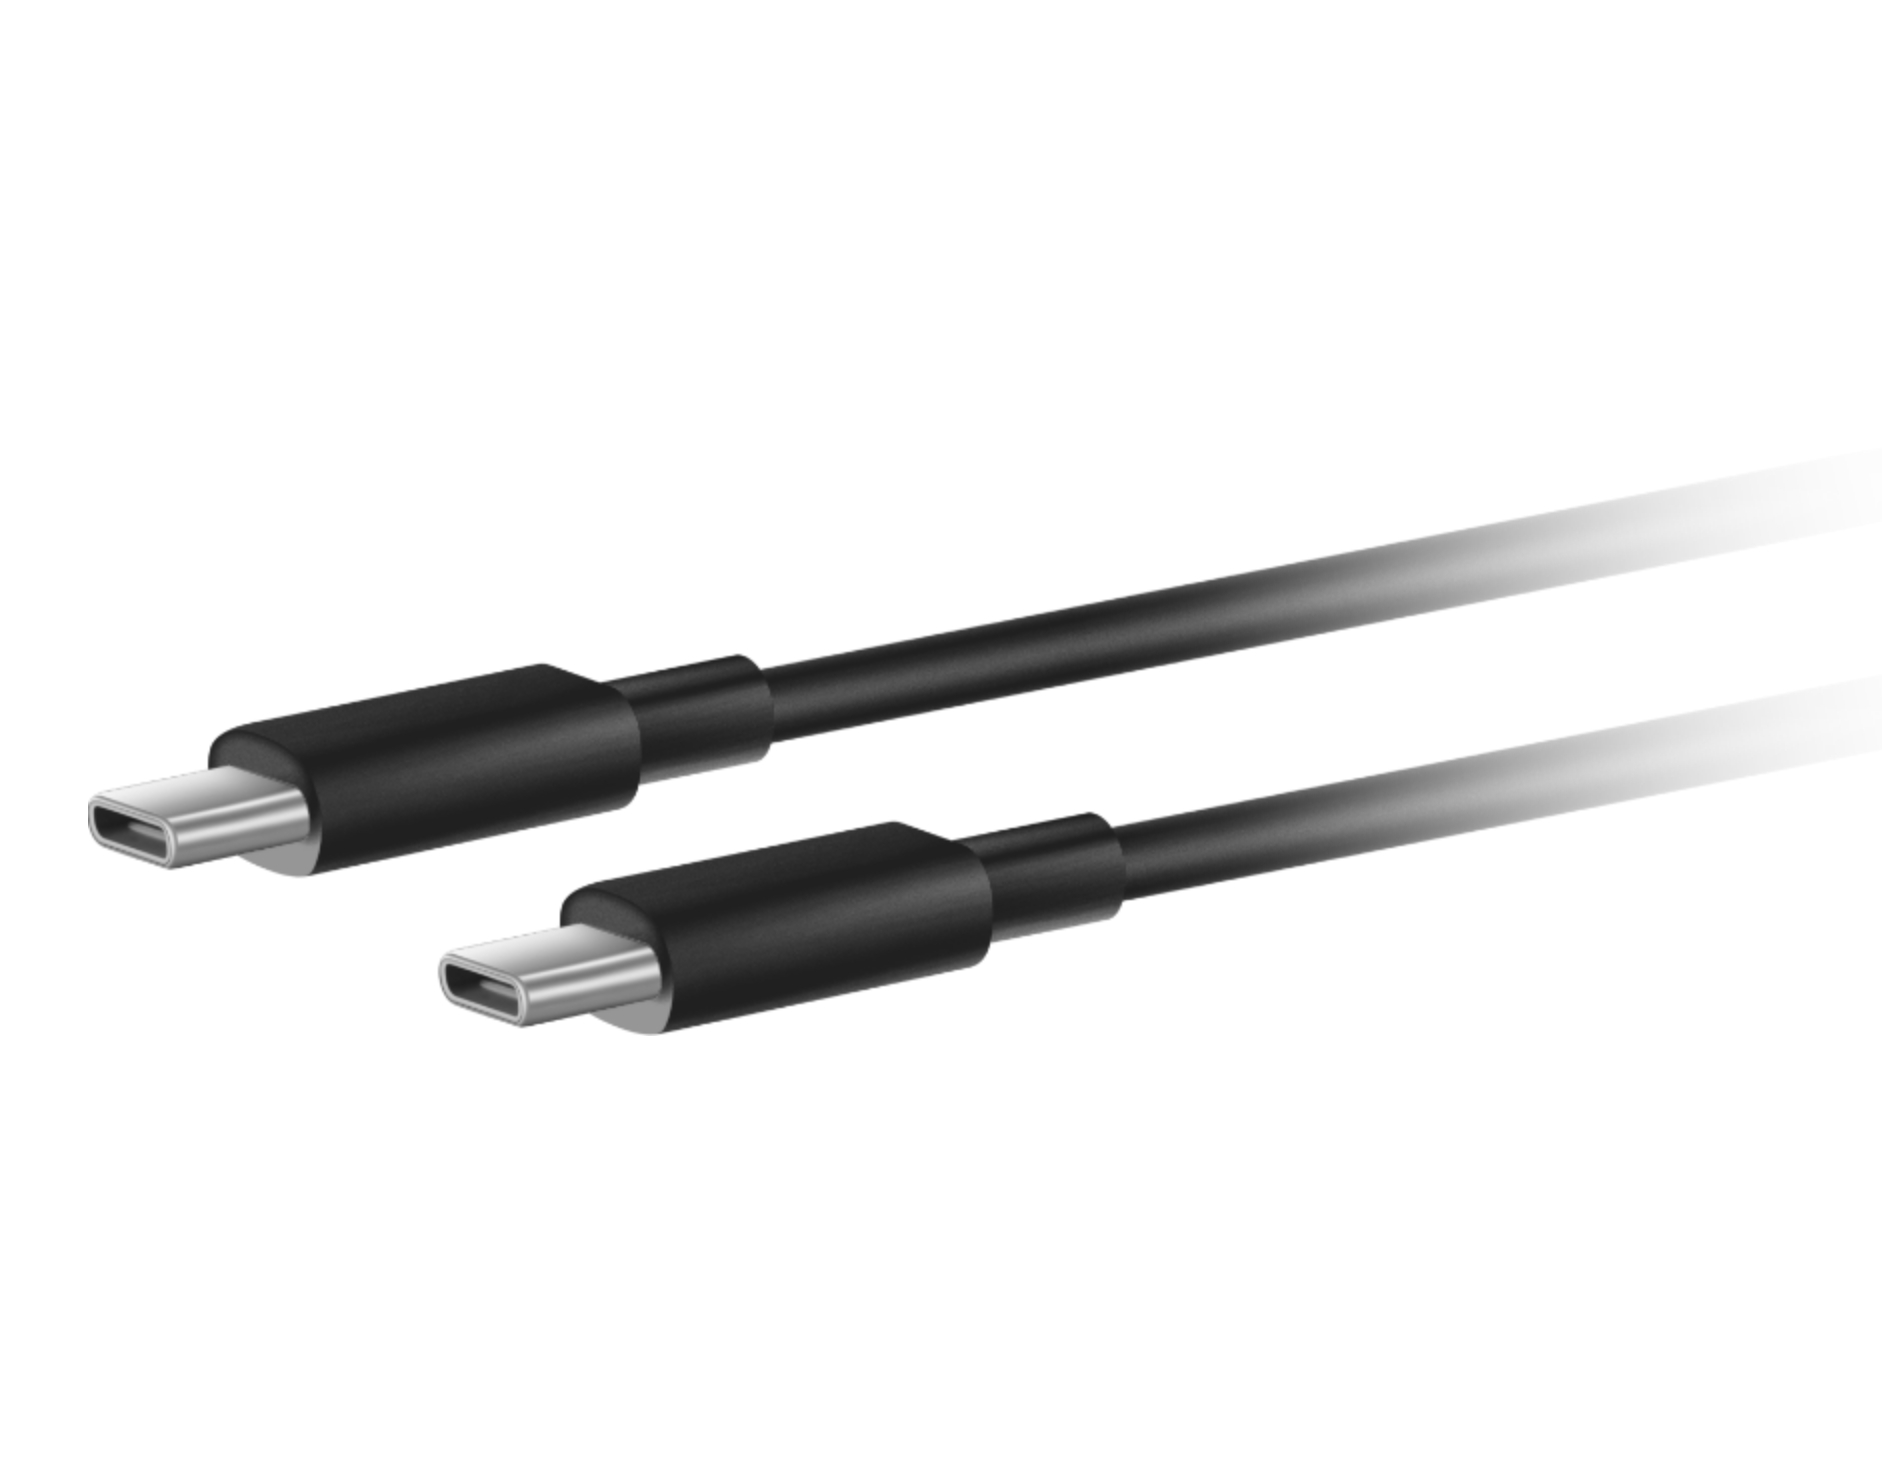 HUAWEI high-speed data cable high quality wire